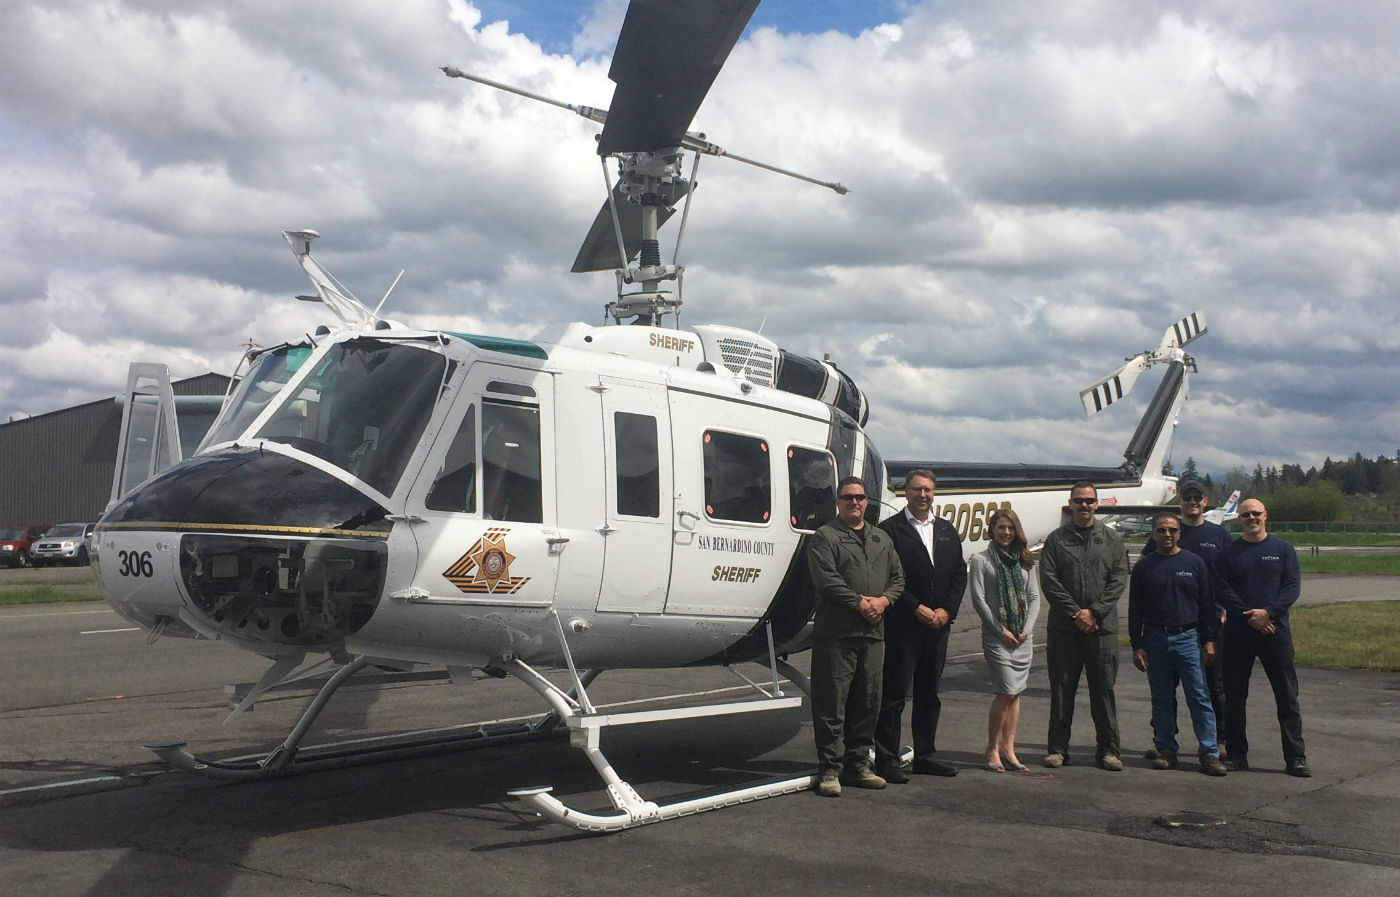 Developed as a cost-effective means of enhancing the performance of the enduring UH-1H platform, the UH-1H3 “hot, high, heavy” upgrade offers operators a portfolio of technical solutions with which to customize the Huey to their specific requirements. Pictured here: Capt Jeff Rose and Lt Al Daniel of the SBCSD and the Vector team in Langley, British Columbia. Vector Photo